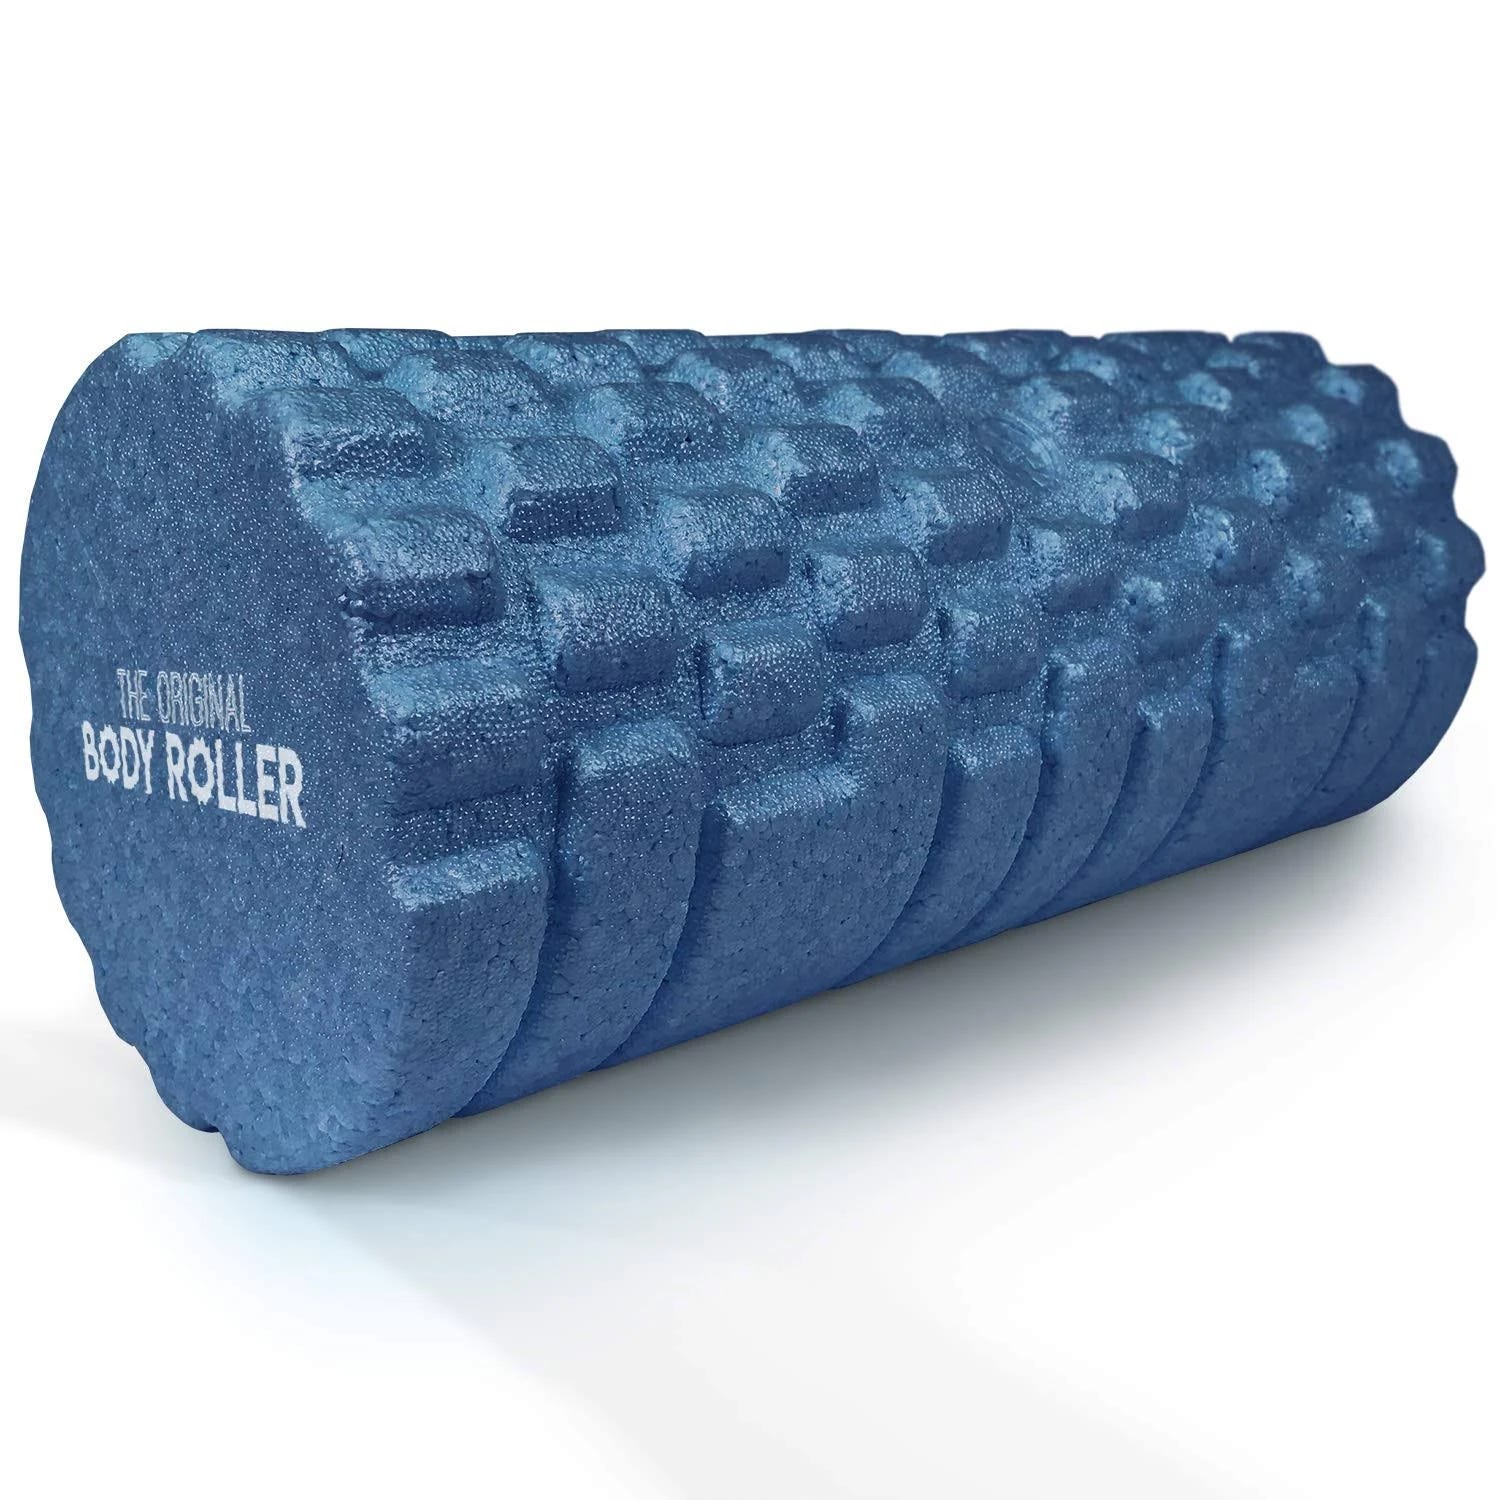 Original Body Roller: High Density Foam Massager for Deep Tissue Therapy | Image